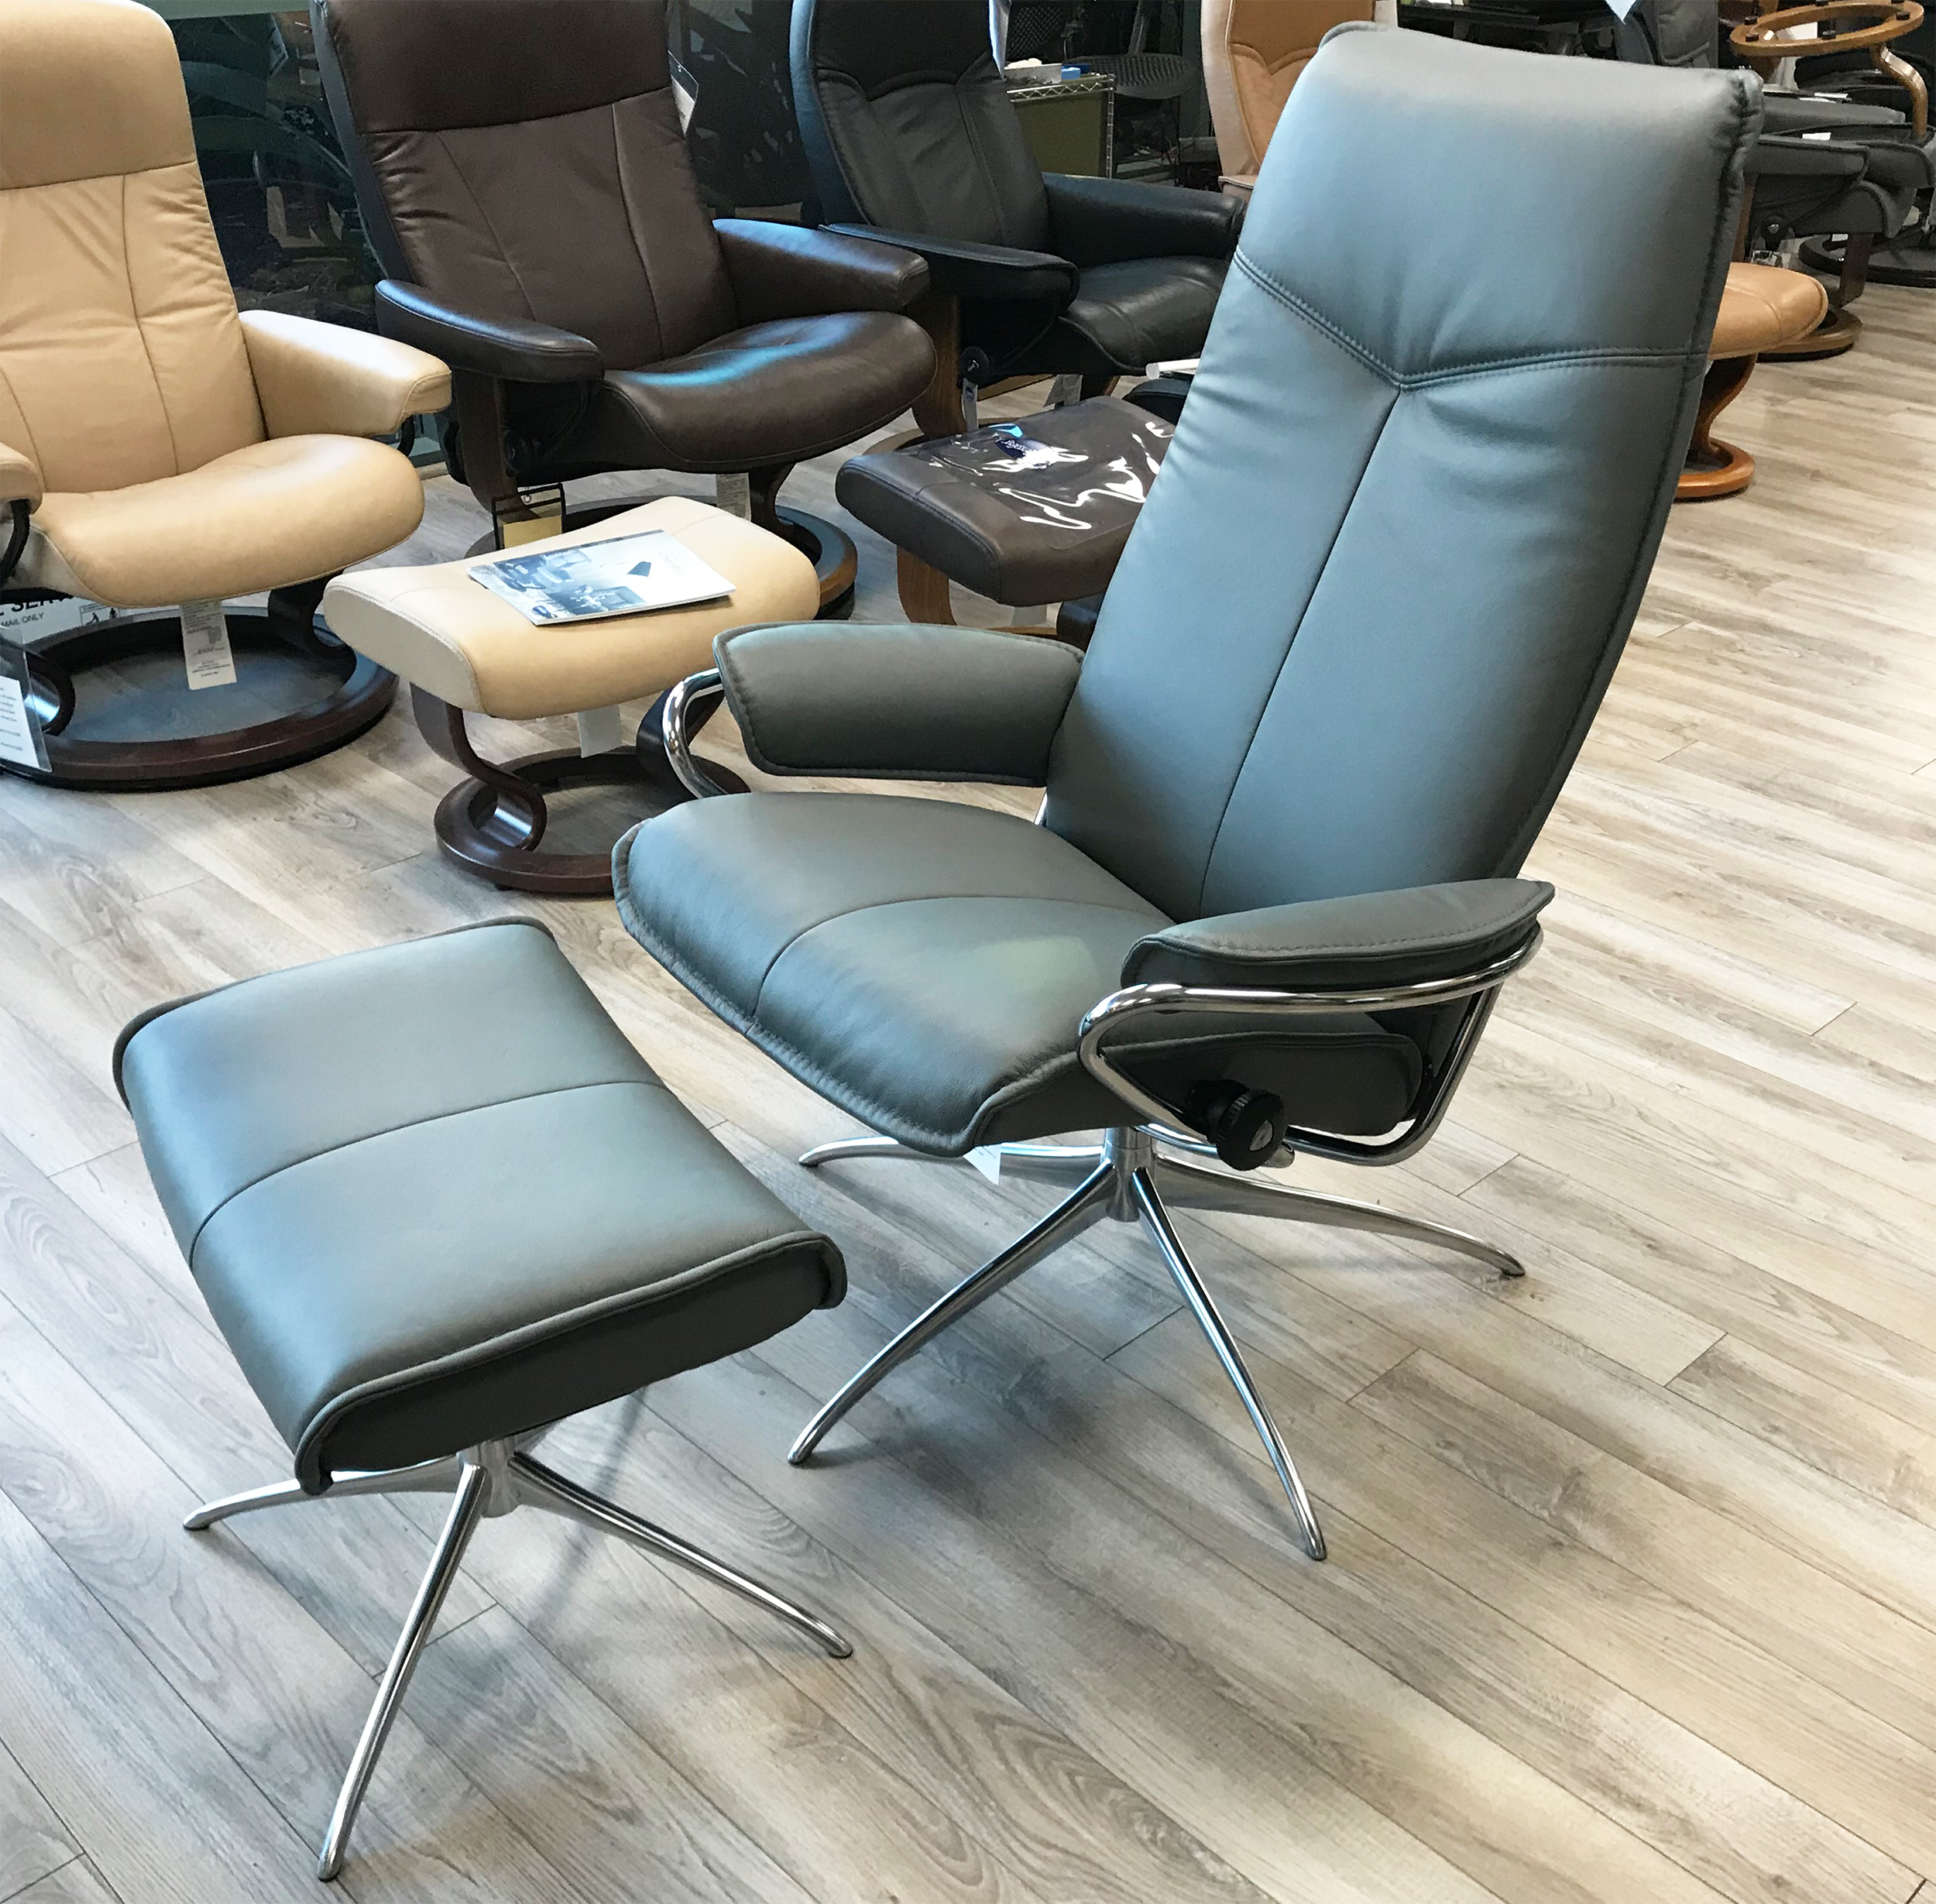 Stressless Leather Batick - City High Back Back Grey High Recliners Leather City Chairs Ekornes Grey Batick Stressless by